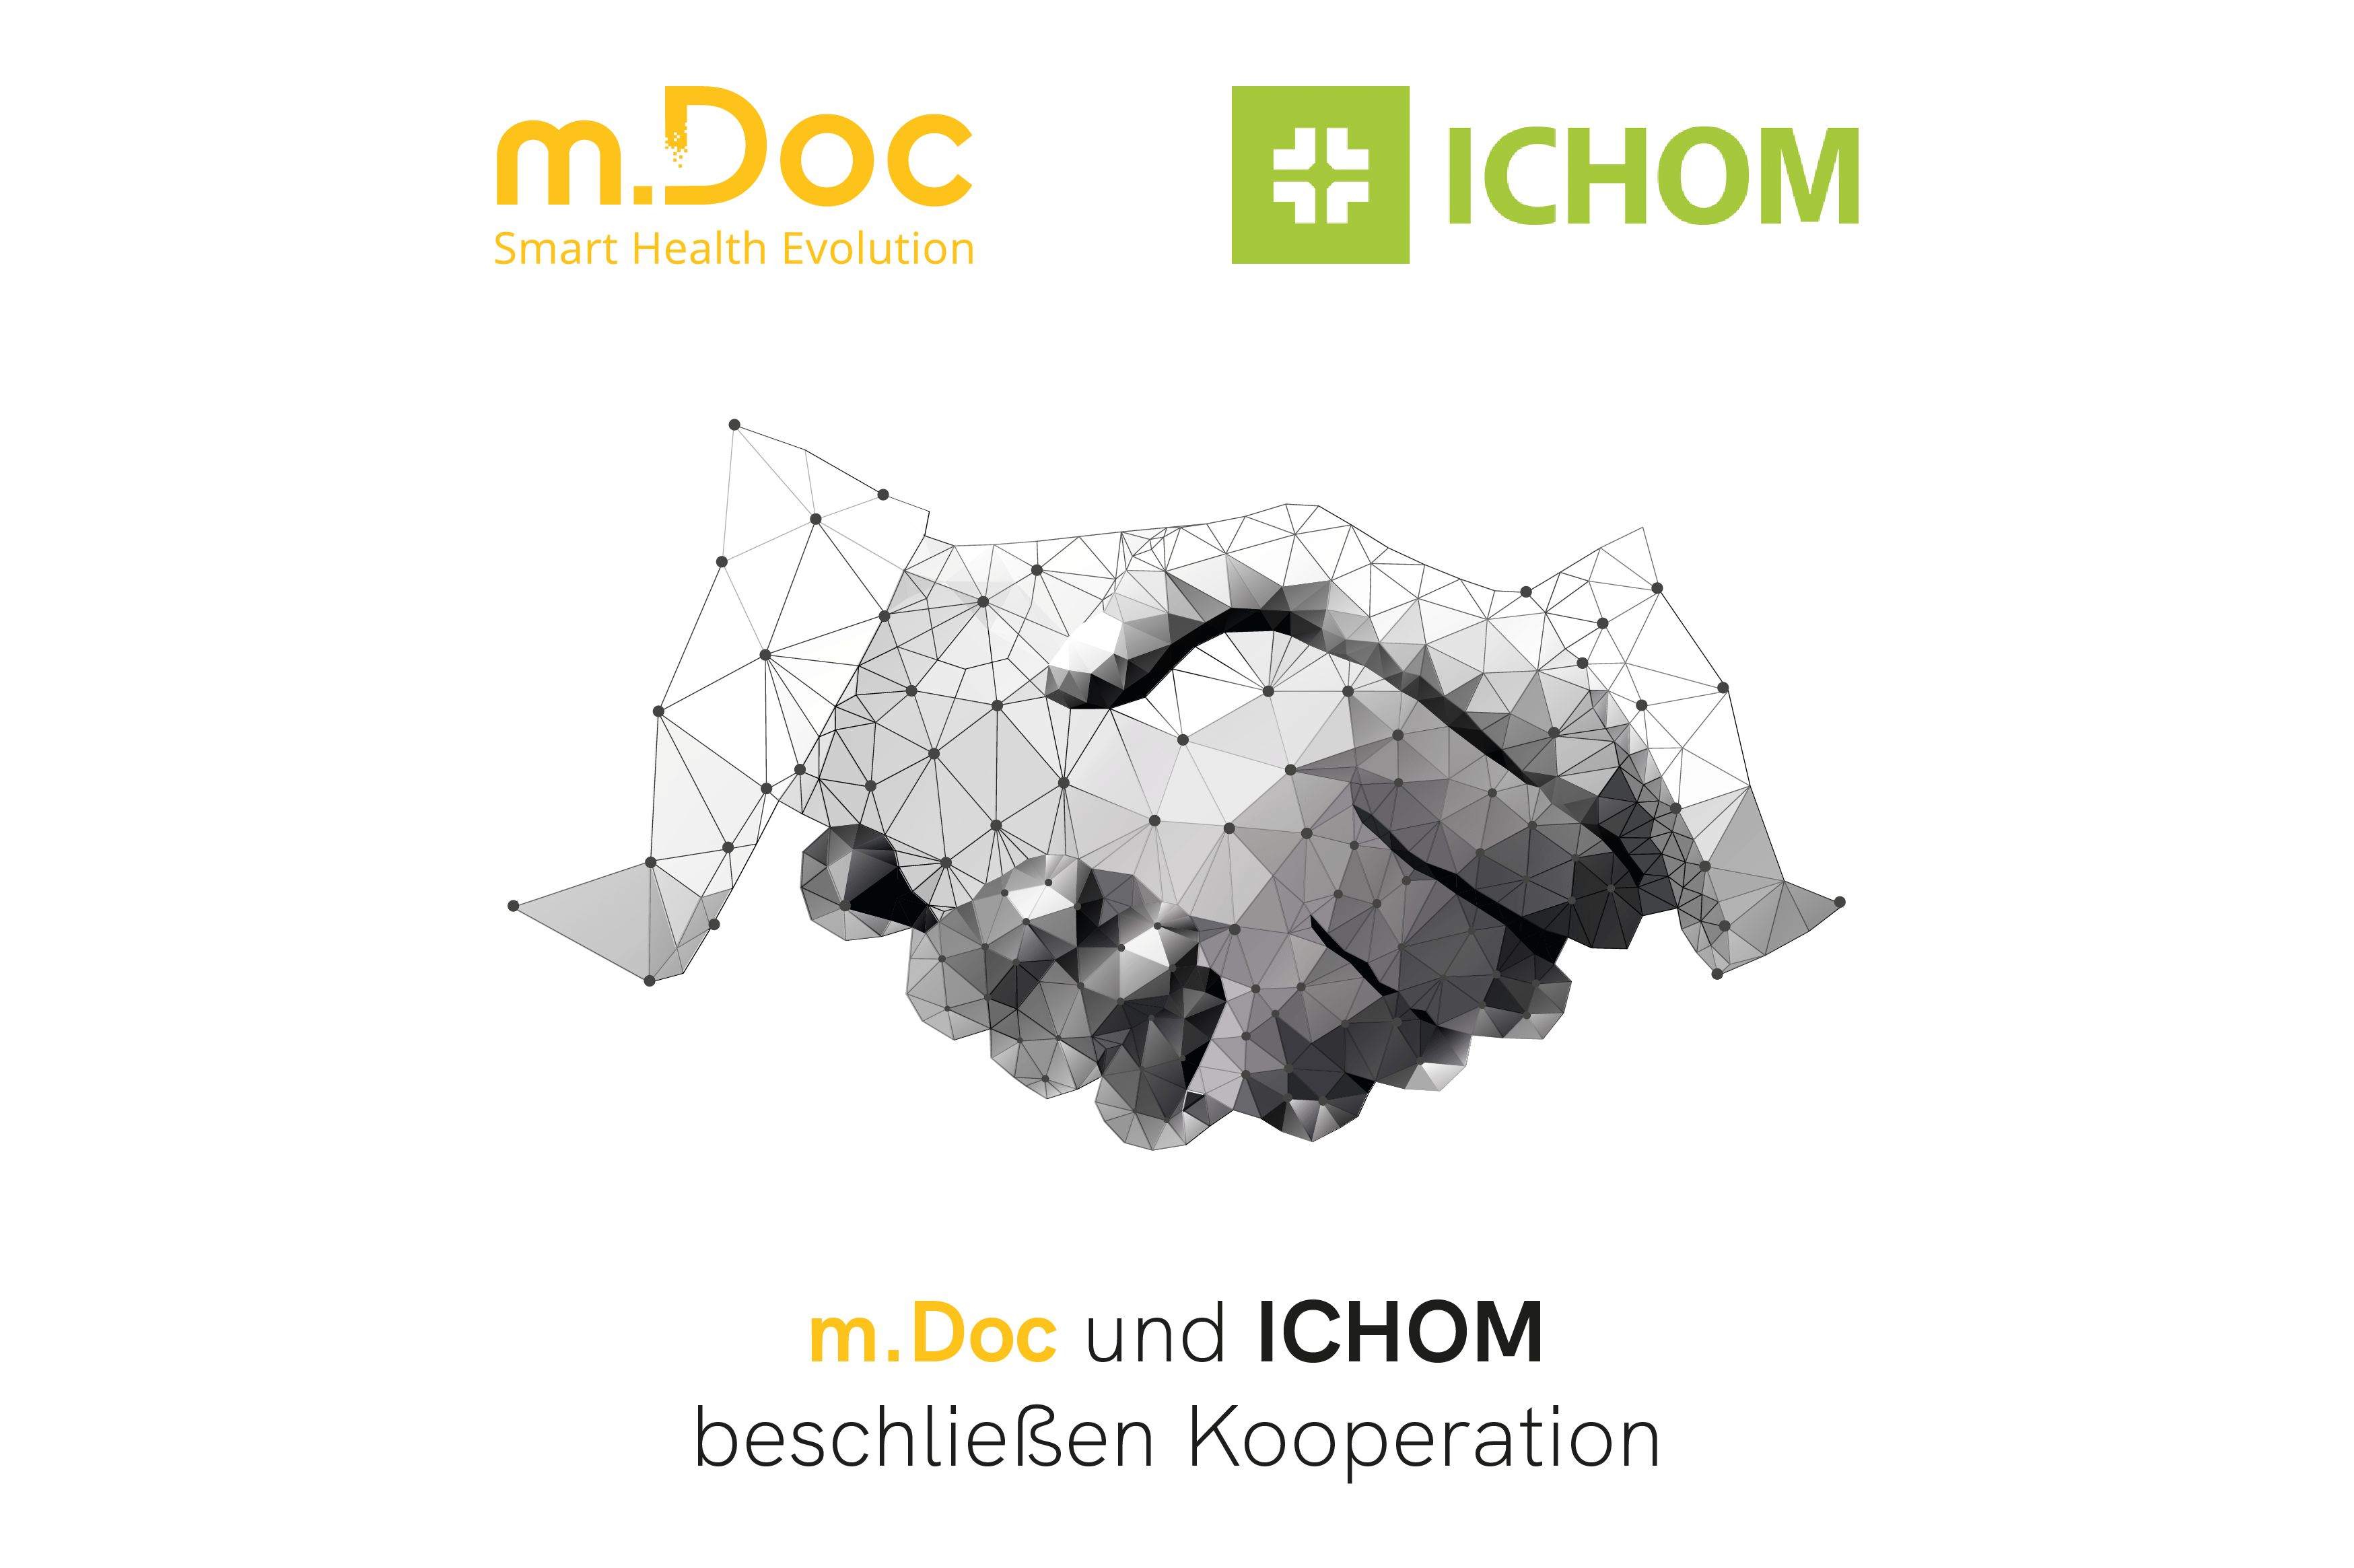 You are currently viewing m.Doc and ICHOM agree on cooperation